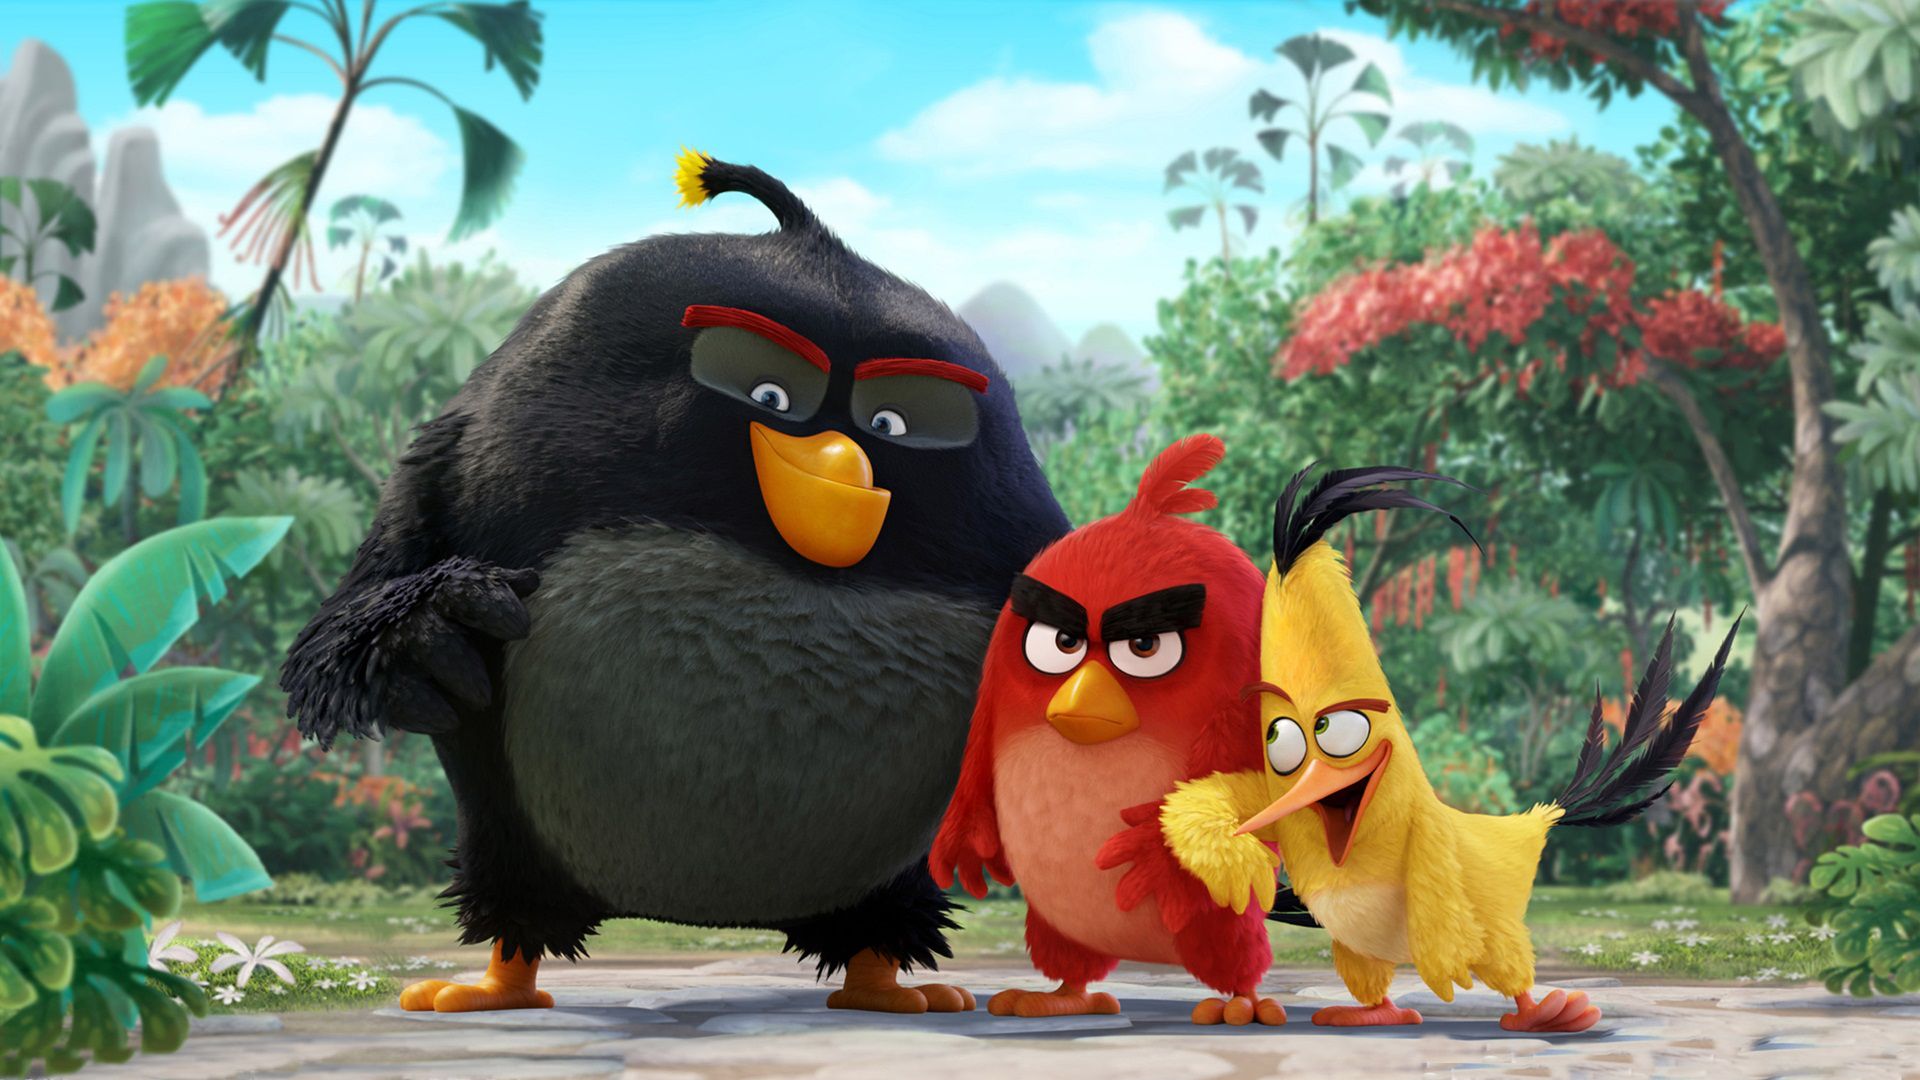 https://fossbytes.com/wp-content/uploads/2015/09/Angry-Birds-Movie-HD-Wallpapers.jpg